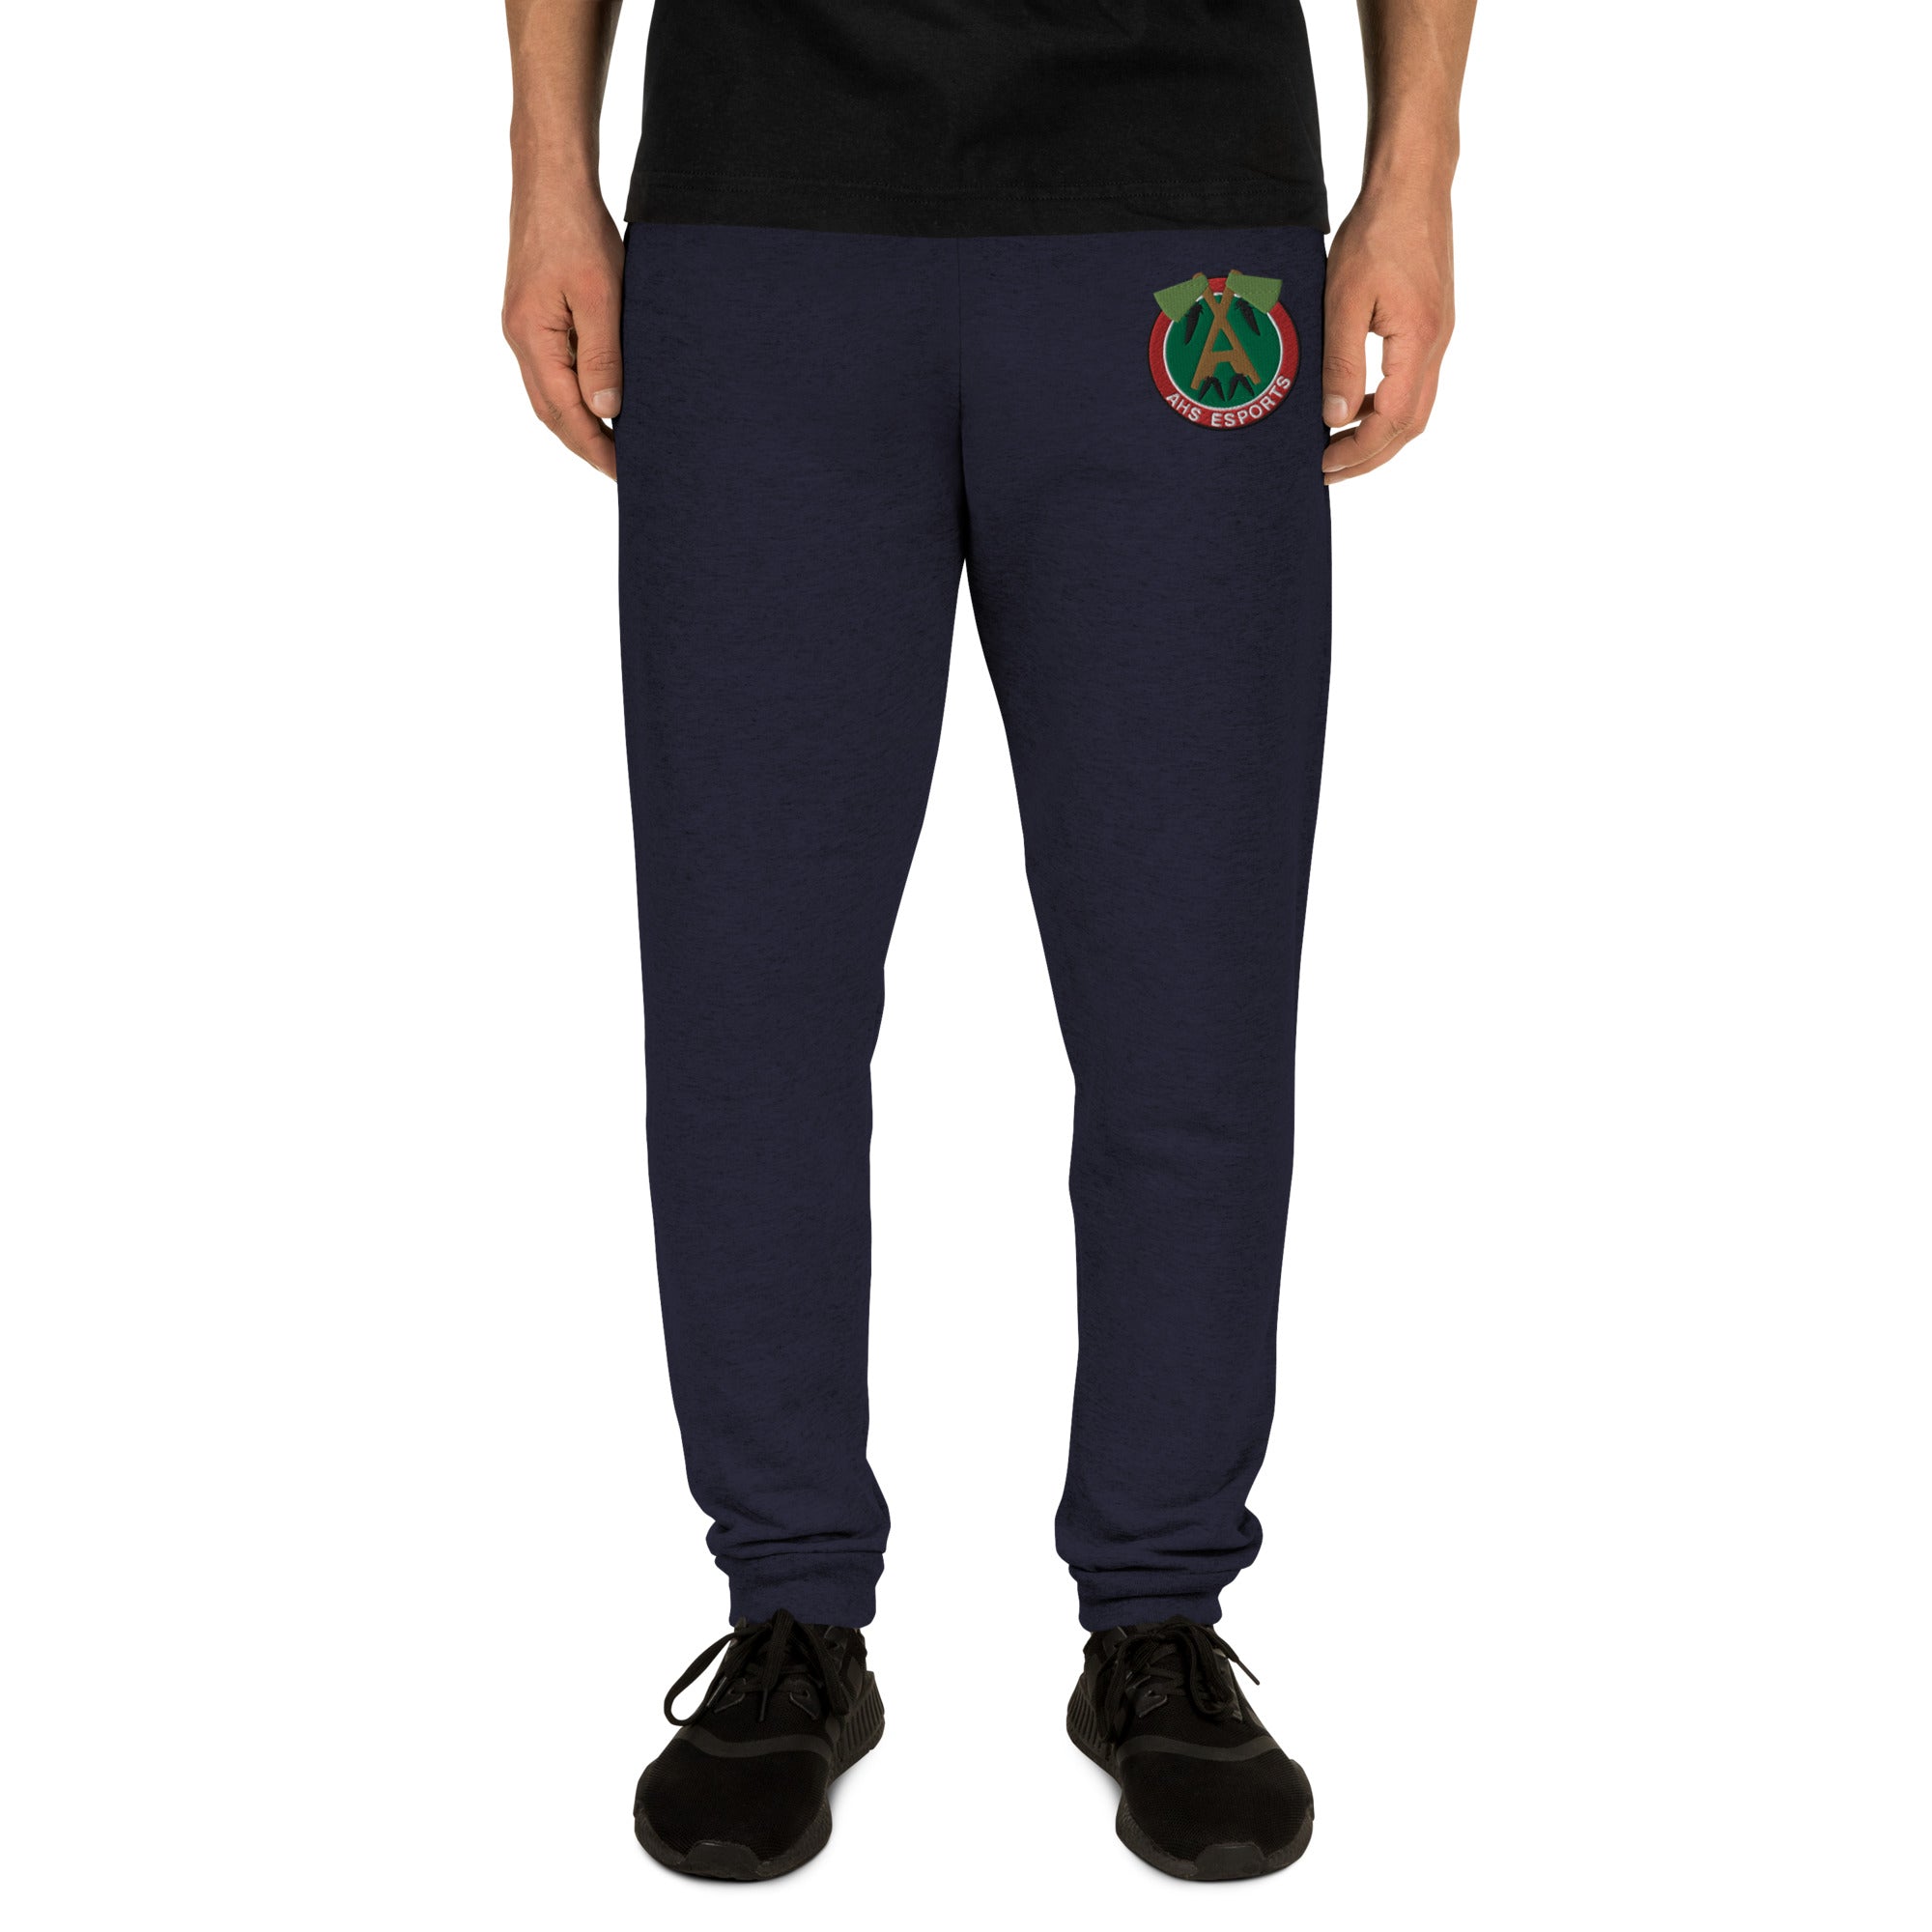 AHS Embroidered Joggers